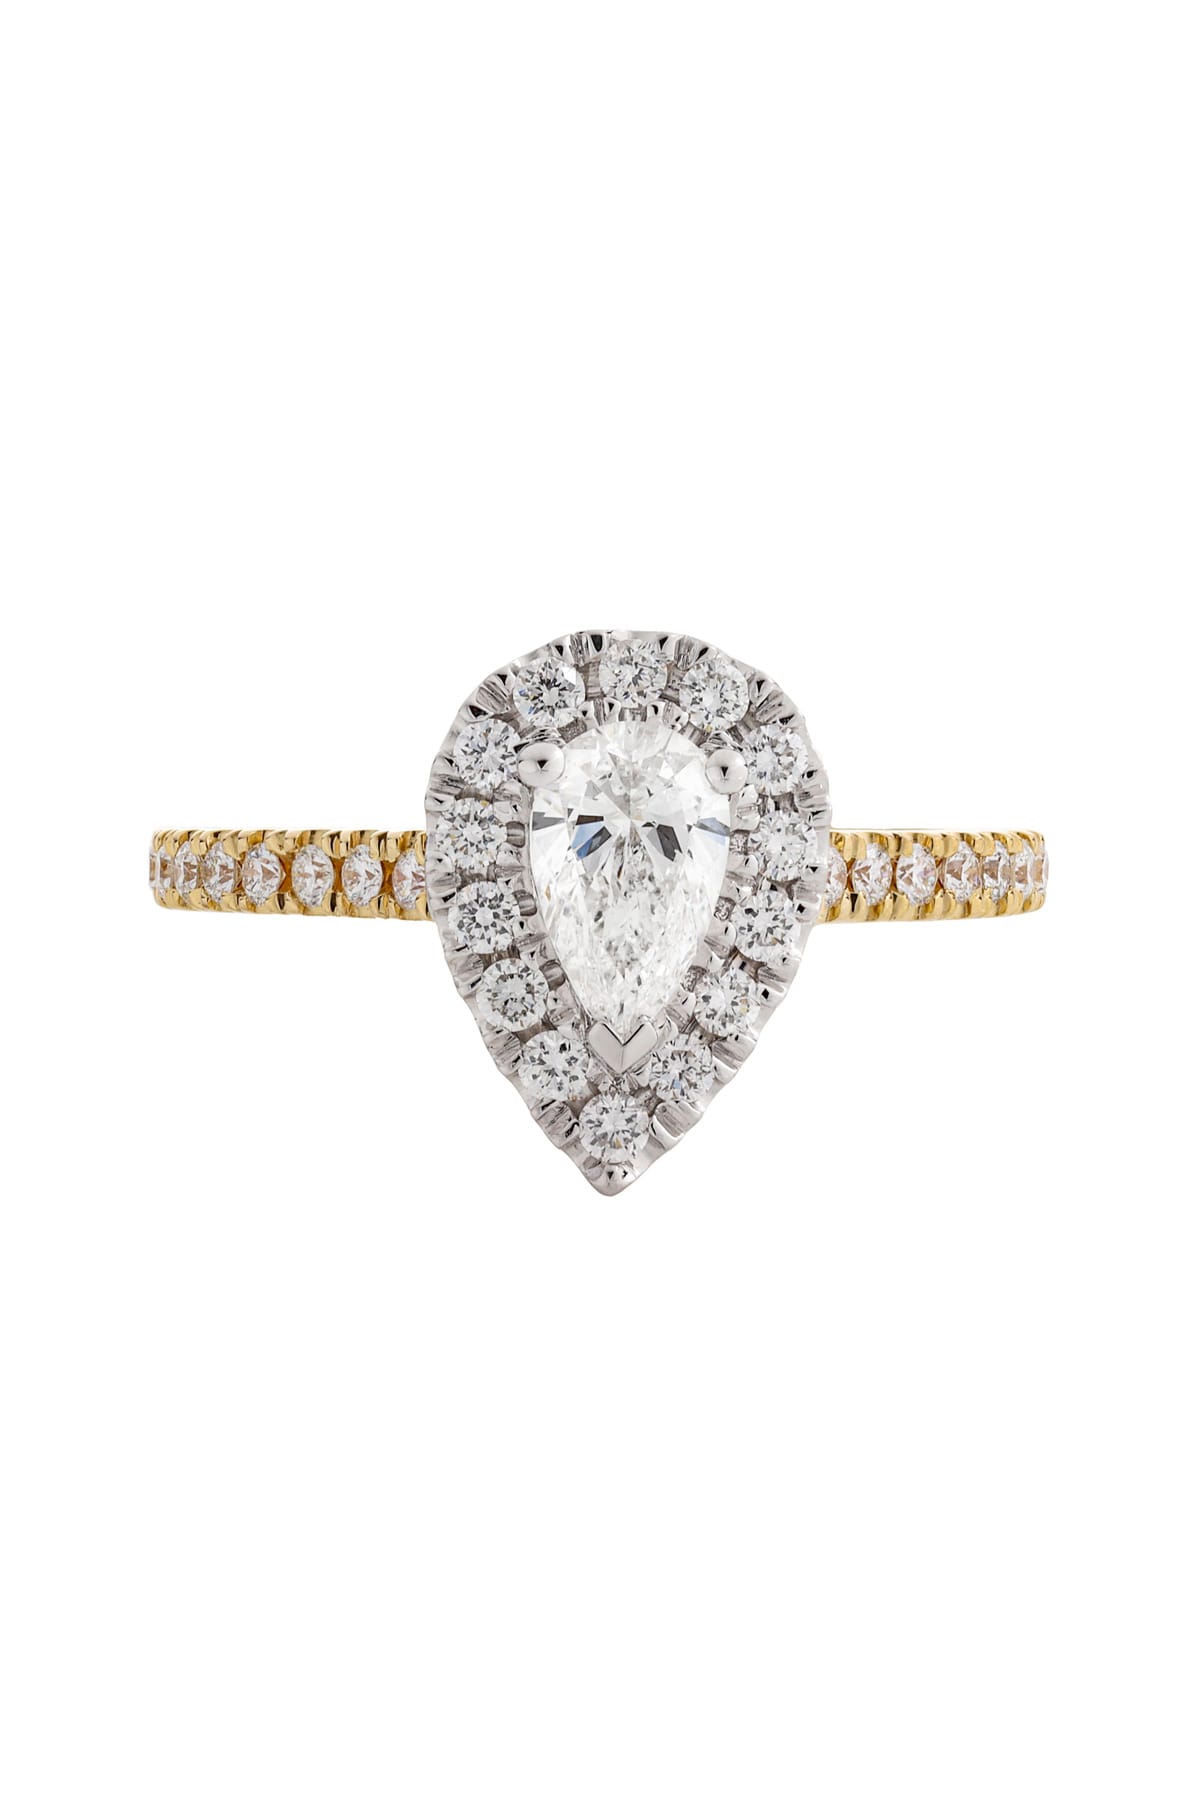 18 Carat Gold With 0.50 Carat Pear Diamond Halo Engagement Ring available at LeGassick Diamonds and Jewellery Gold Coast, Australia.